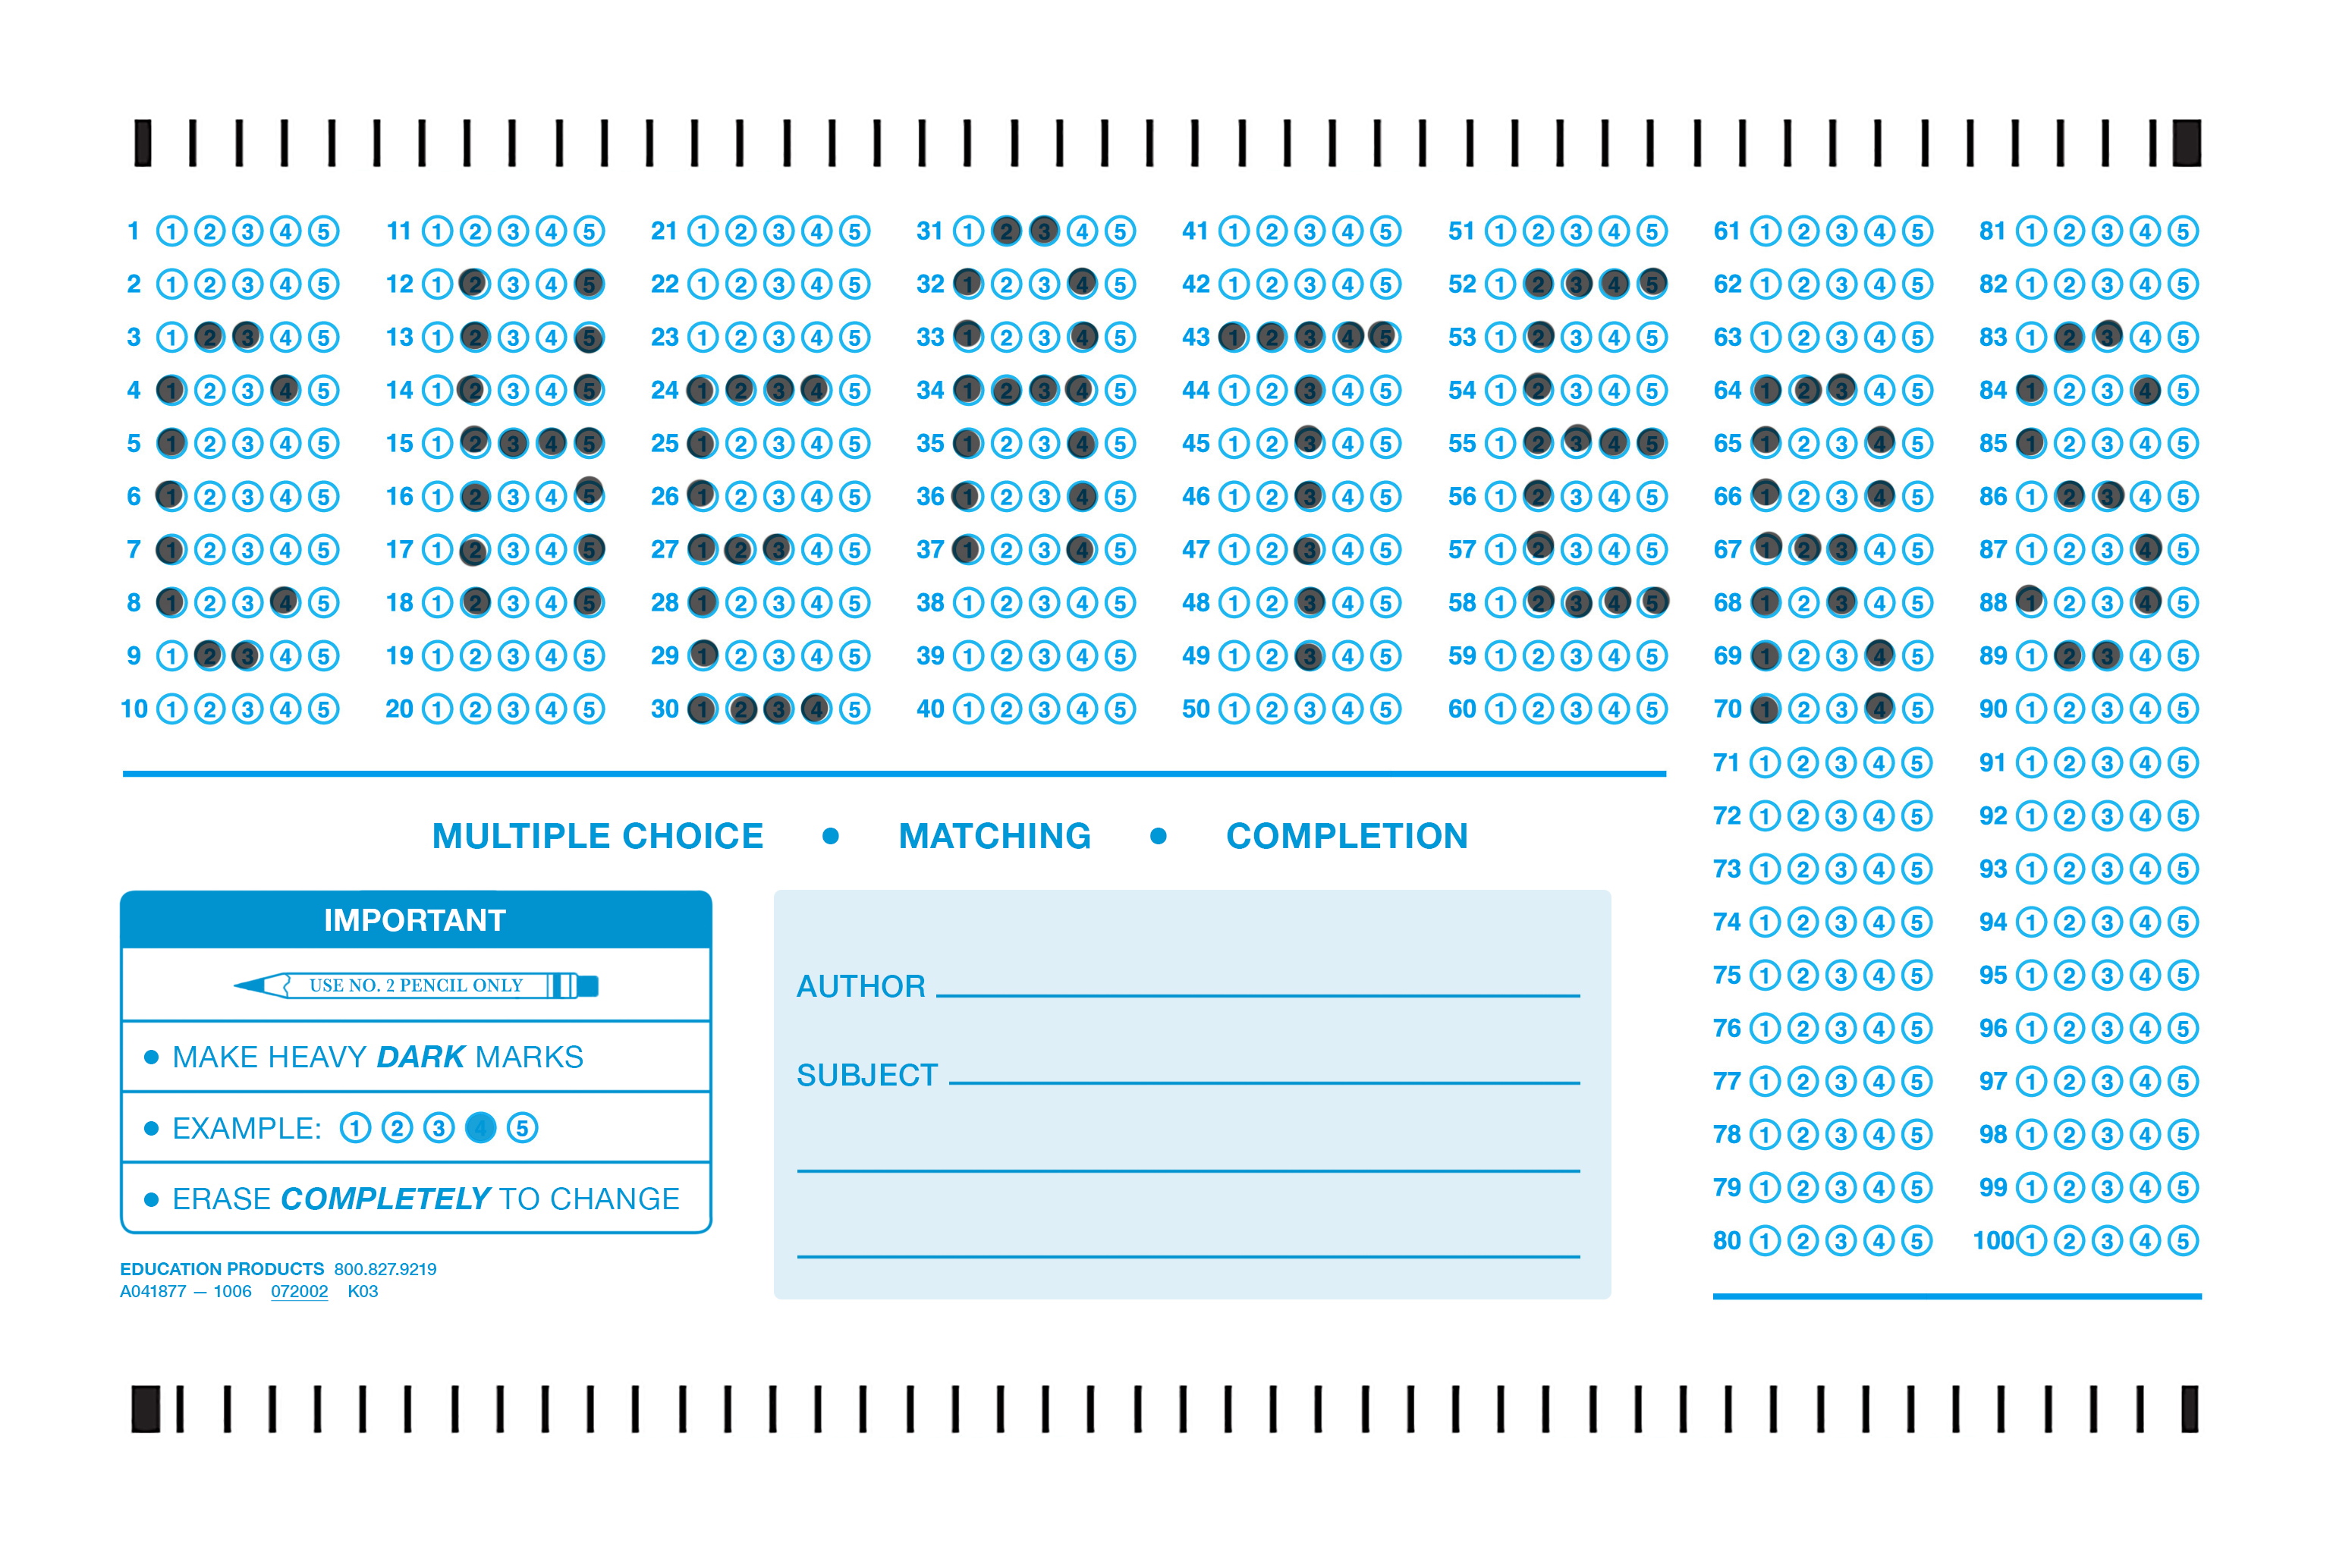 cheaters-scantron--Version-2-2.png